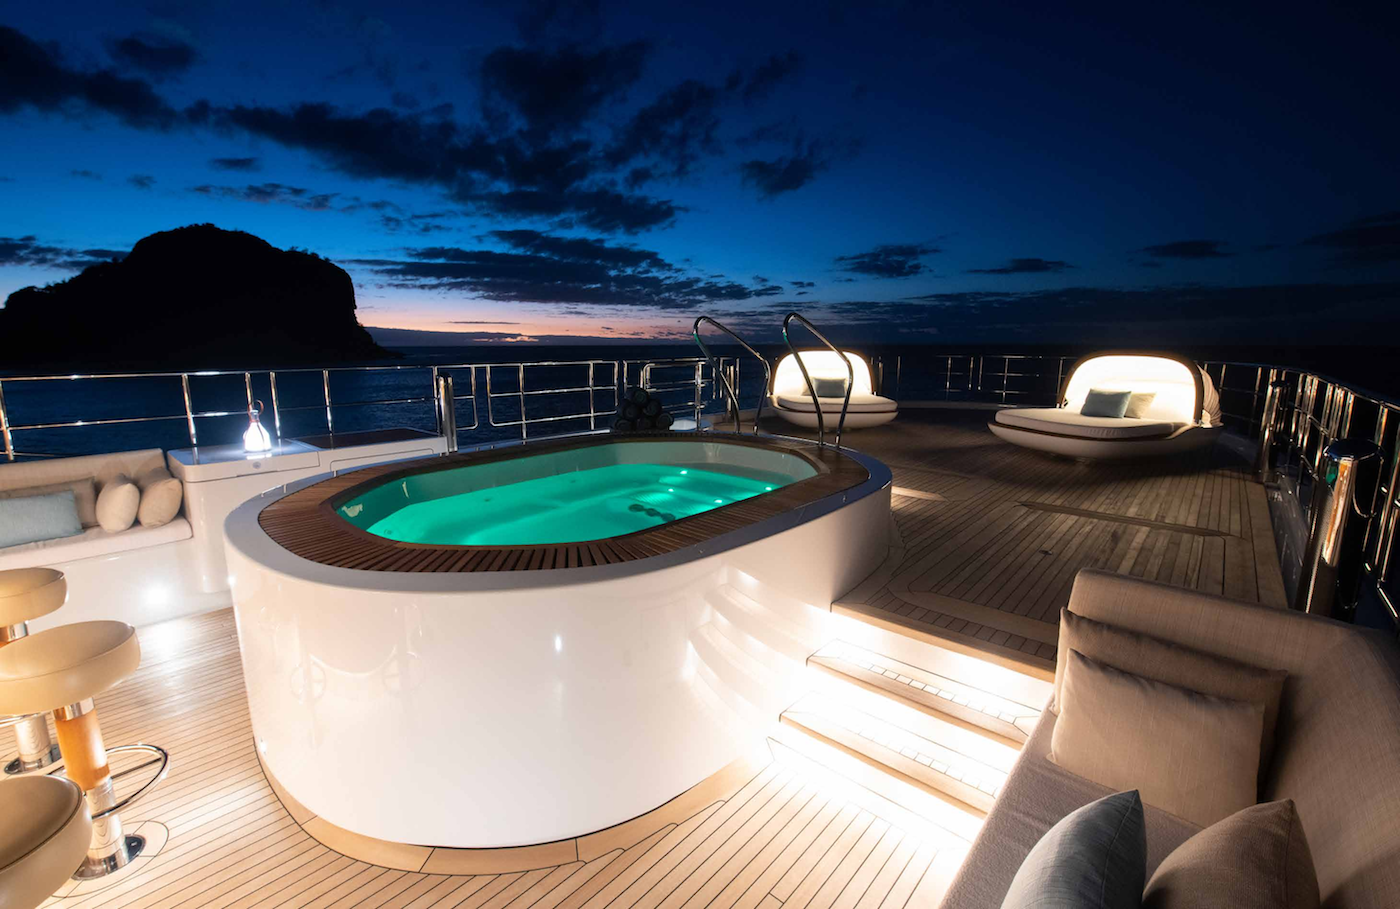 Jacuzzi By Night